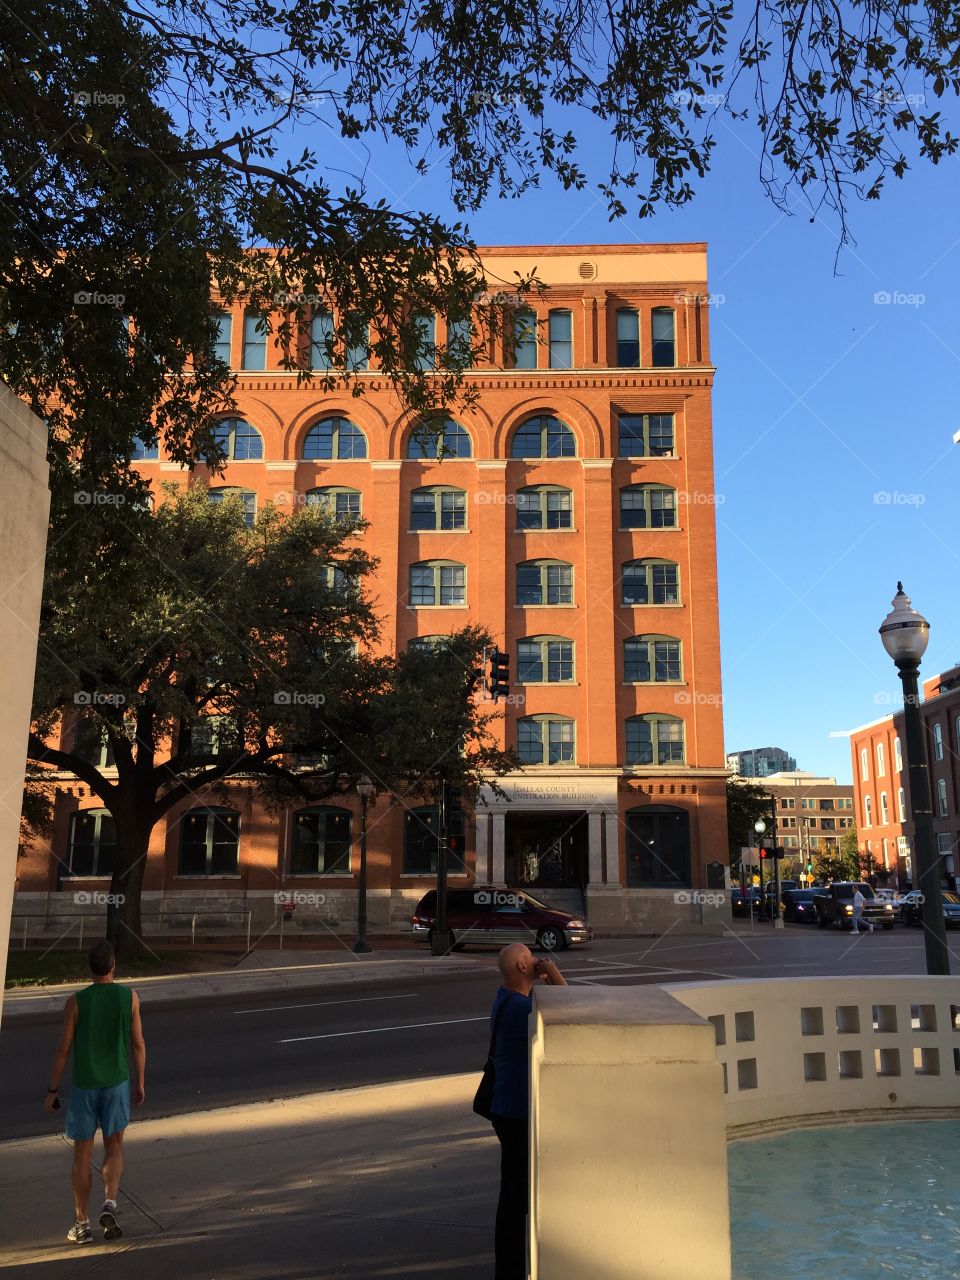 The book depository from the Kennedy assassination at Dealey Plaza in Dallas, Texas